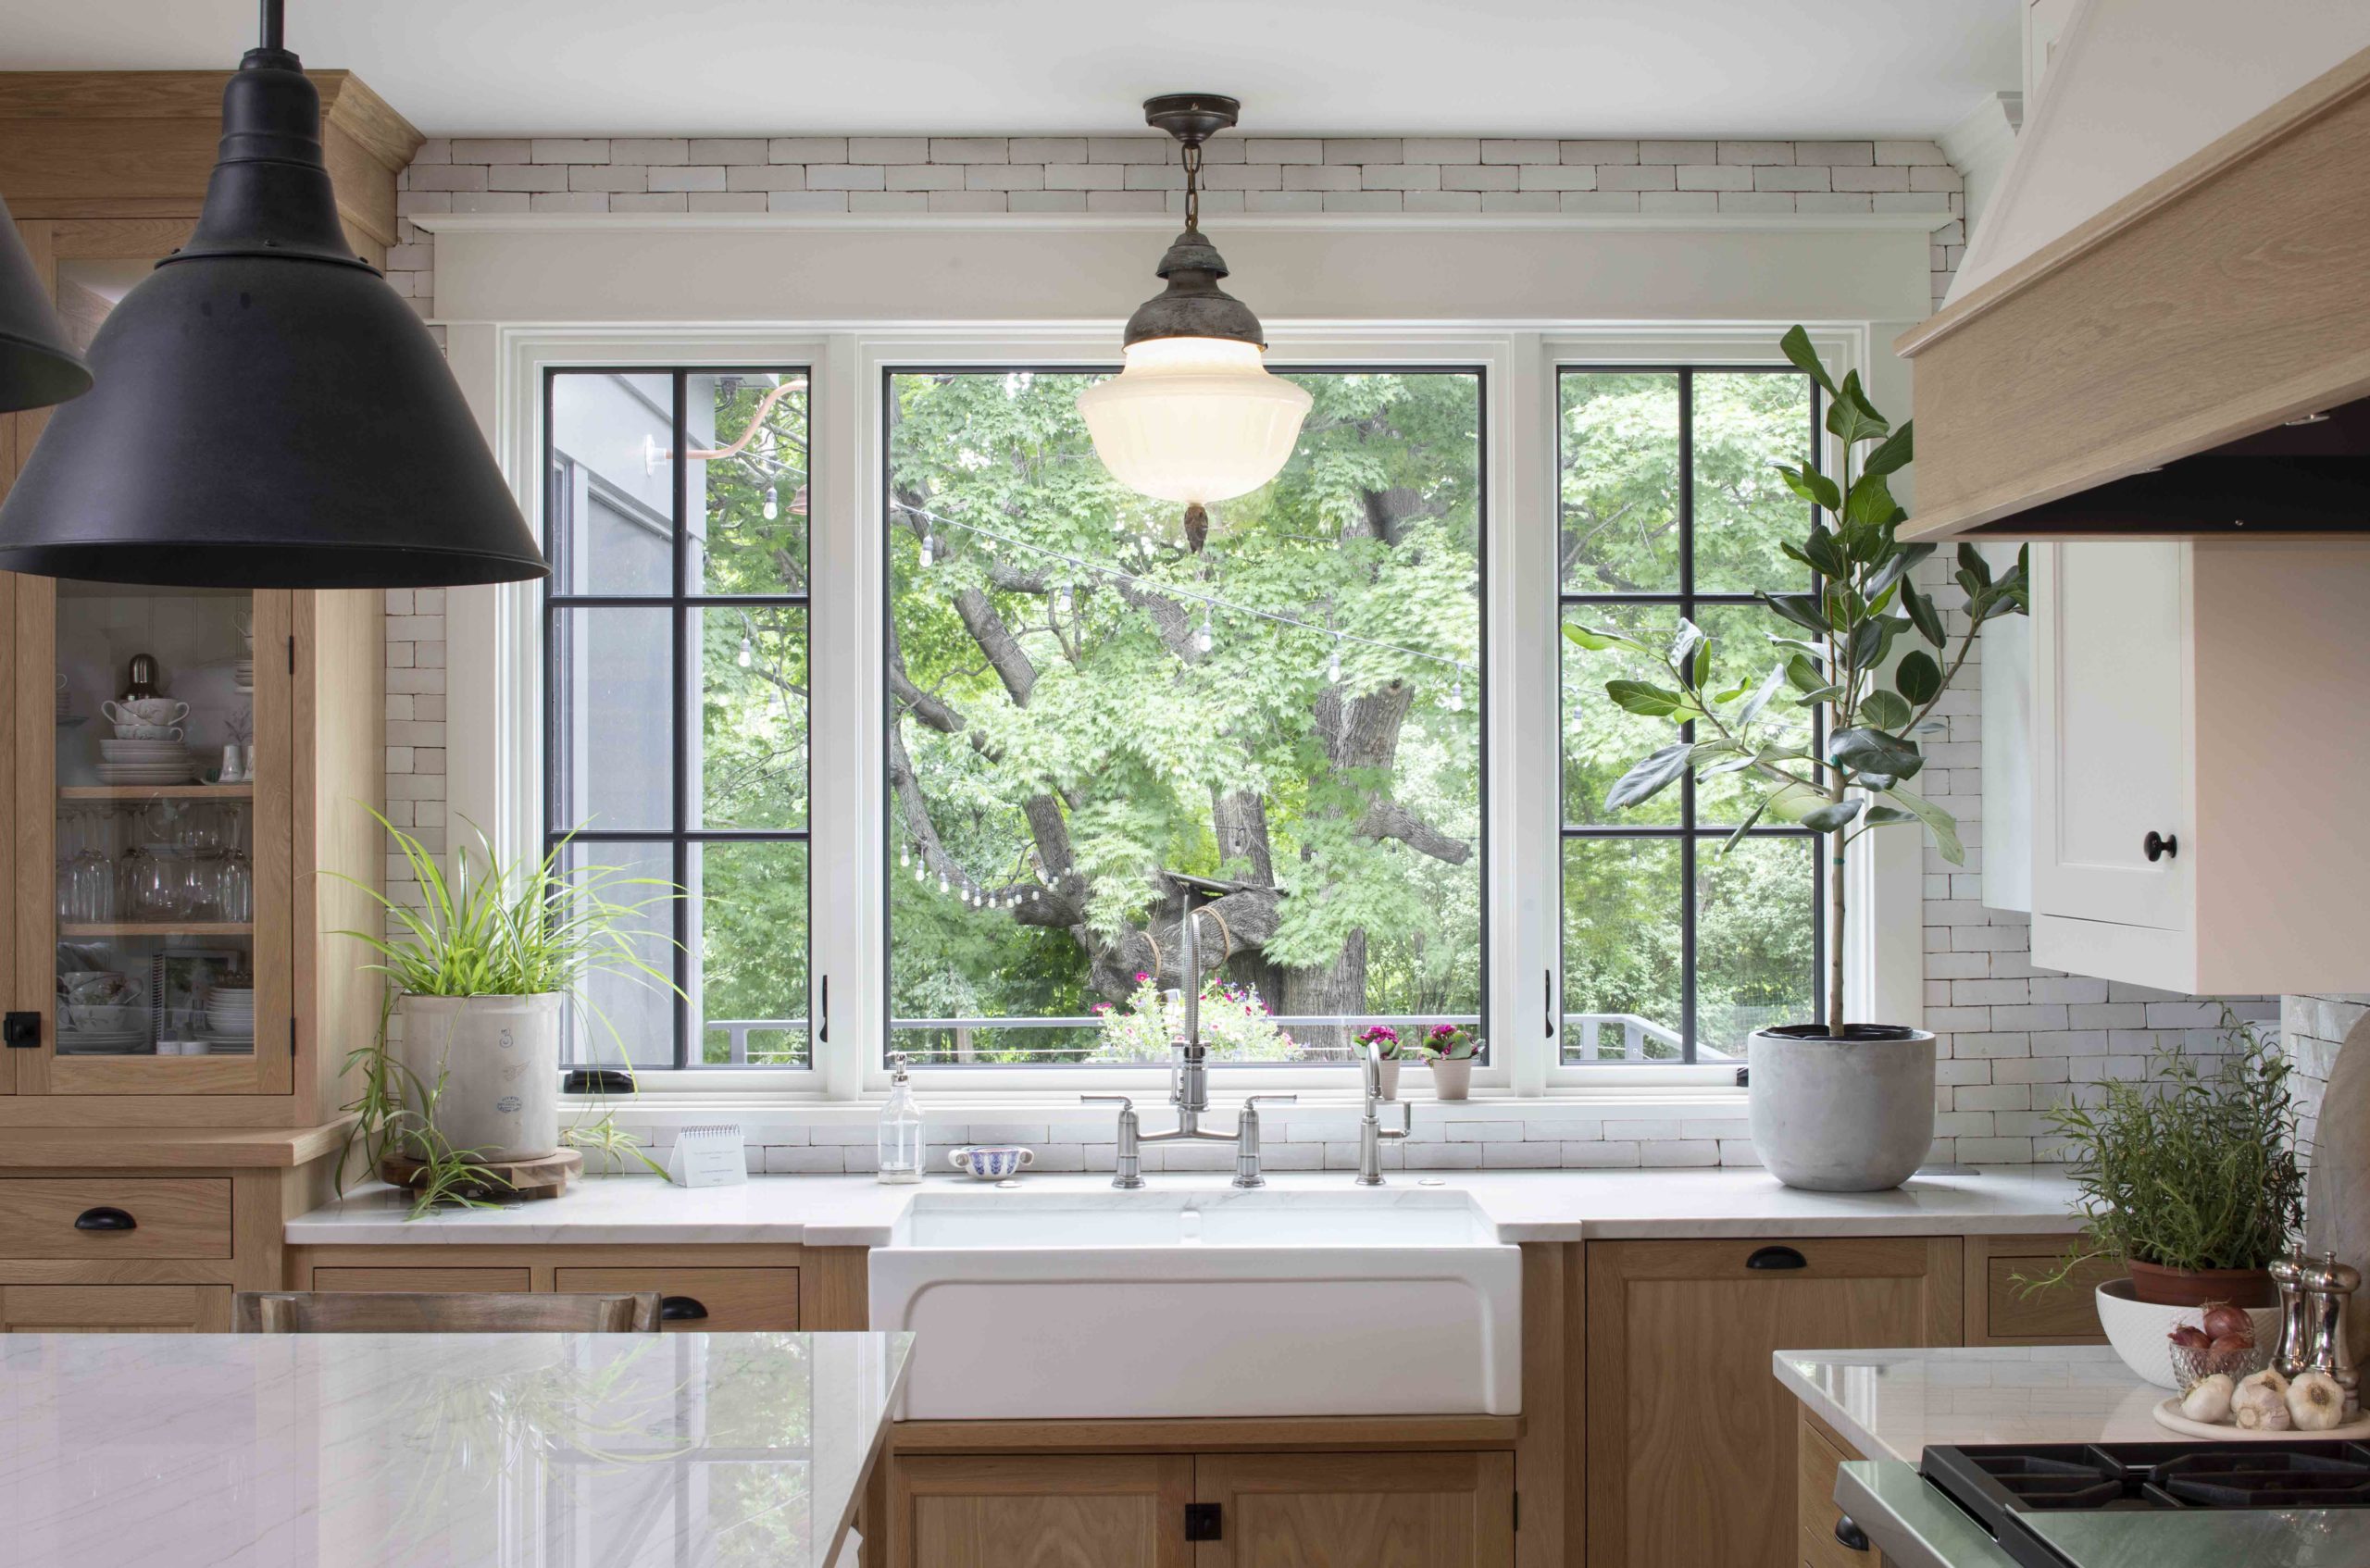 A transitional kitchen with a sink and a window in a custom home.